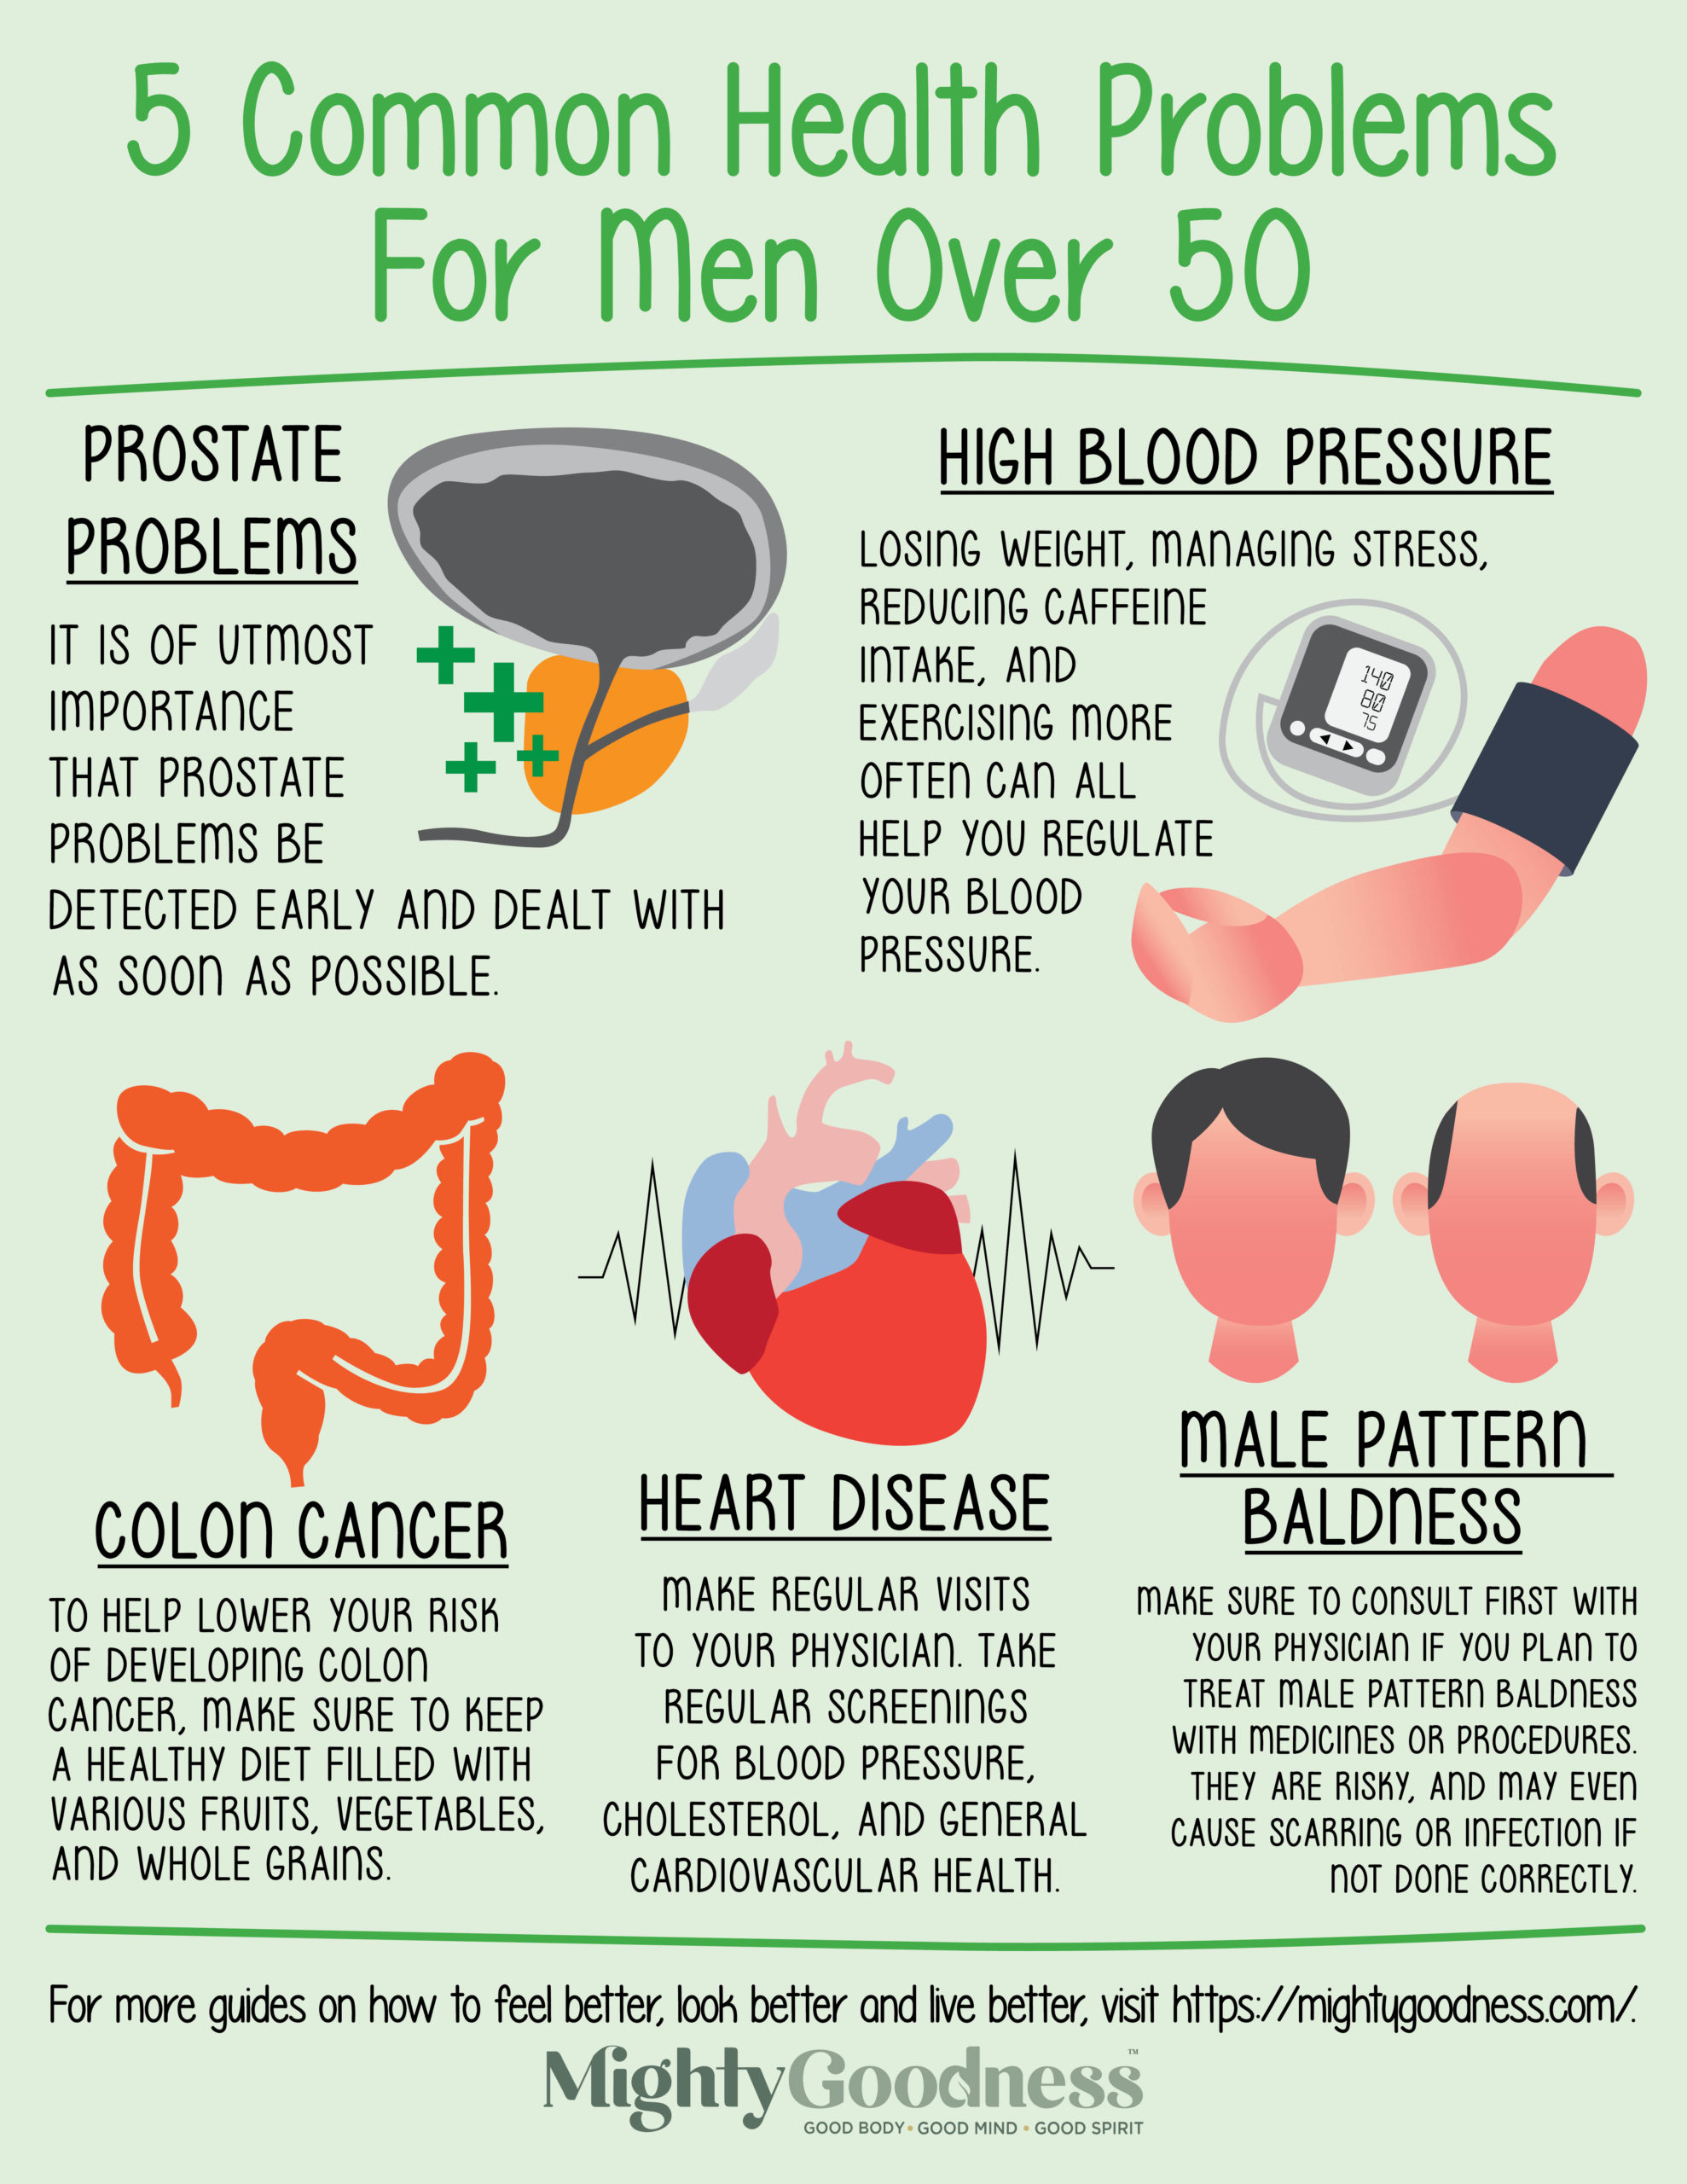 5 Common Health Problems For Men Over 50